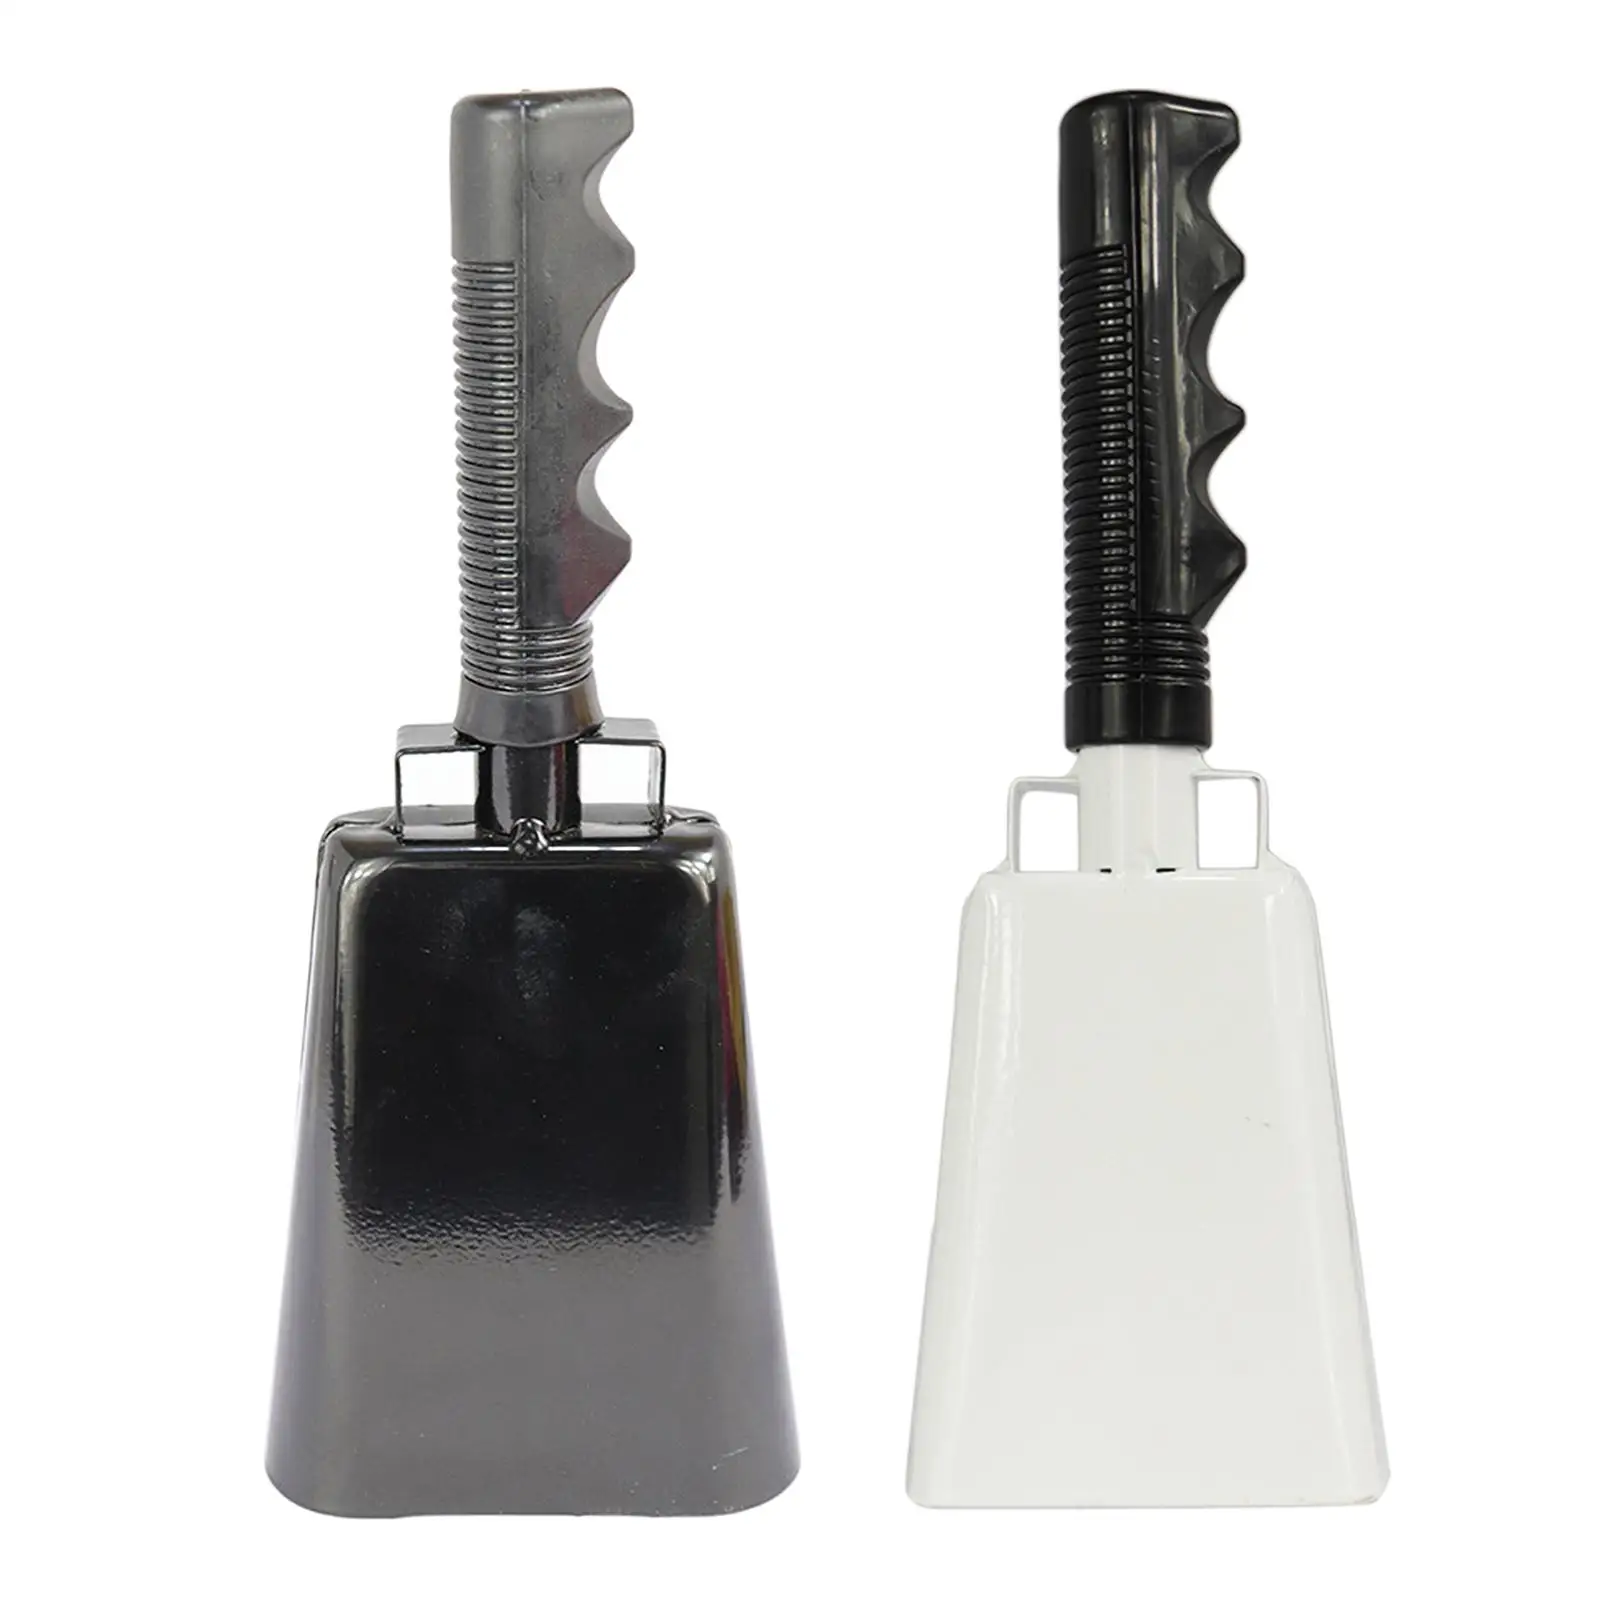 Musical Hand Bells Metal Cowbell Percussion Noise Makers for Concert Rhythm